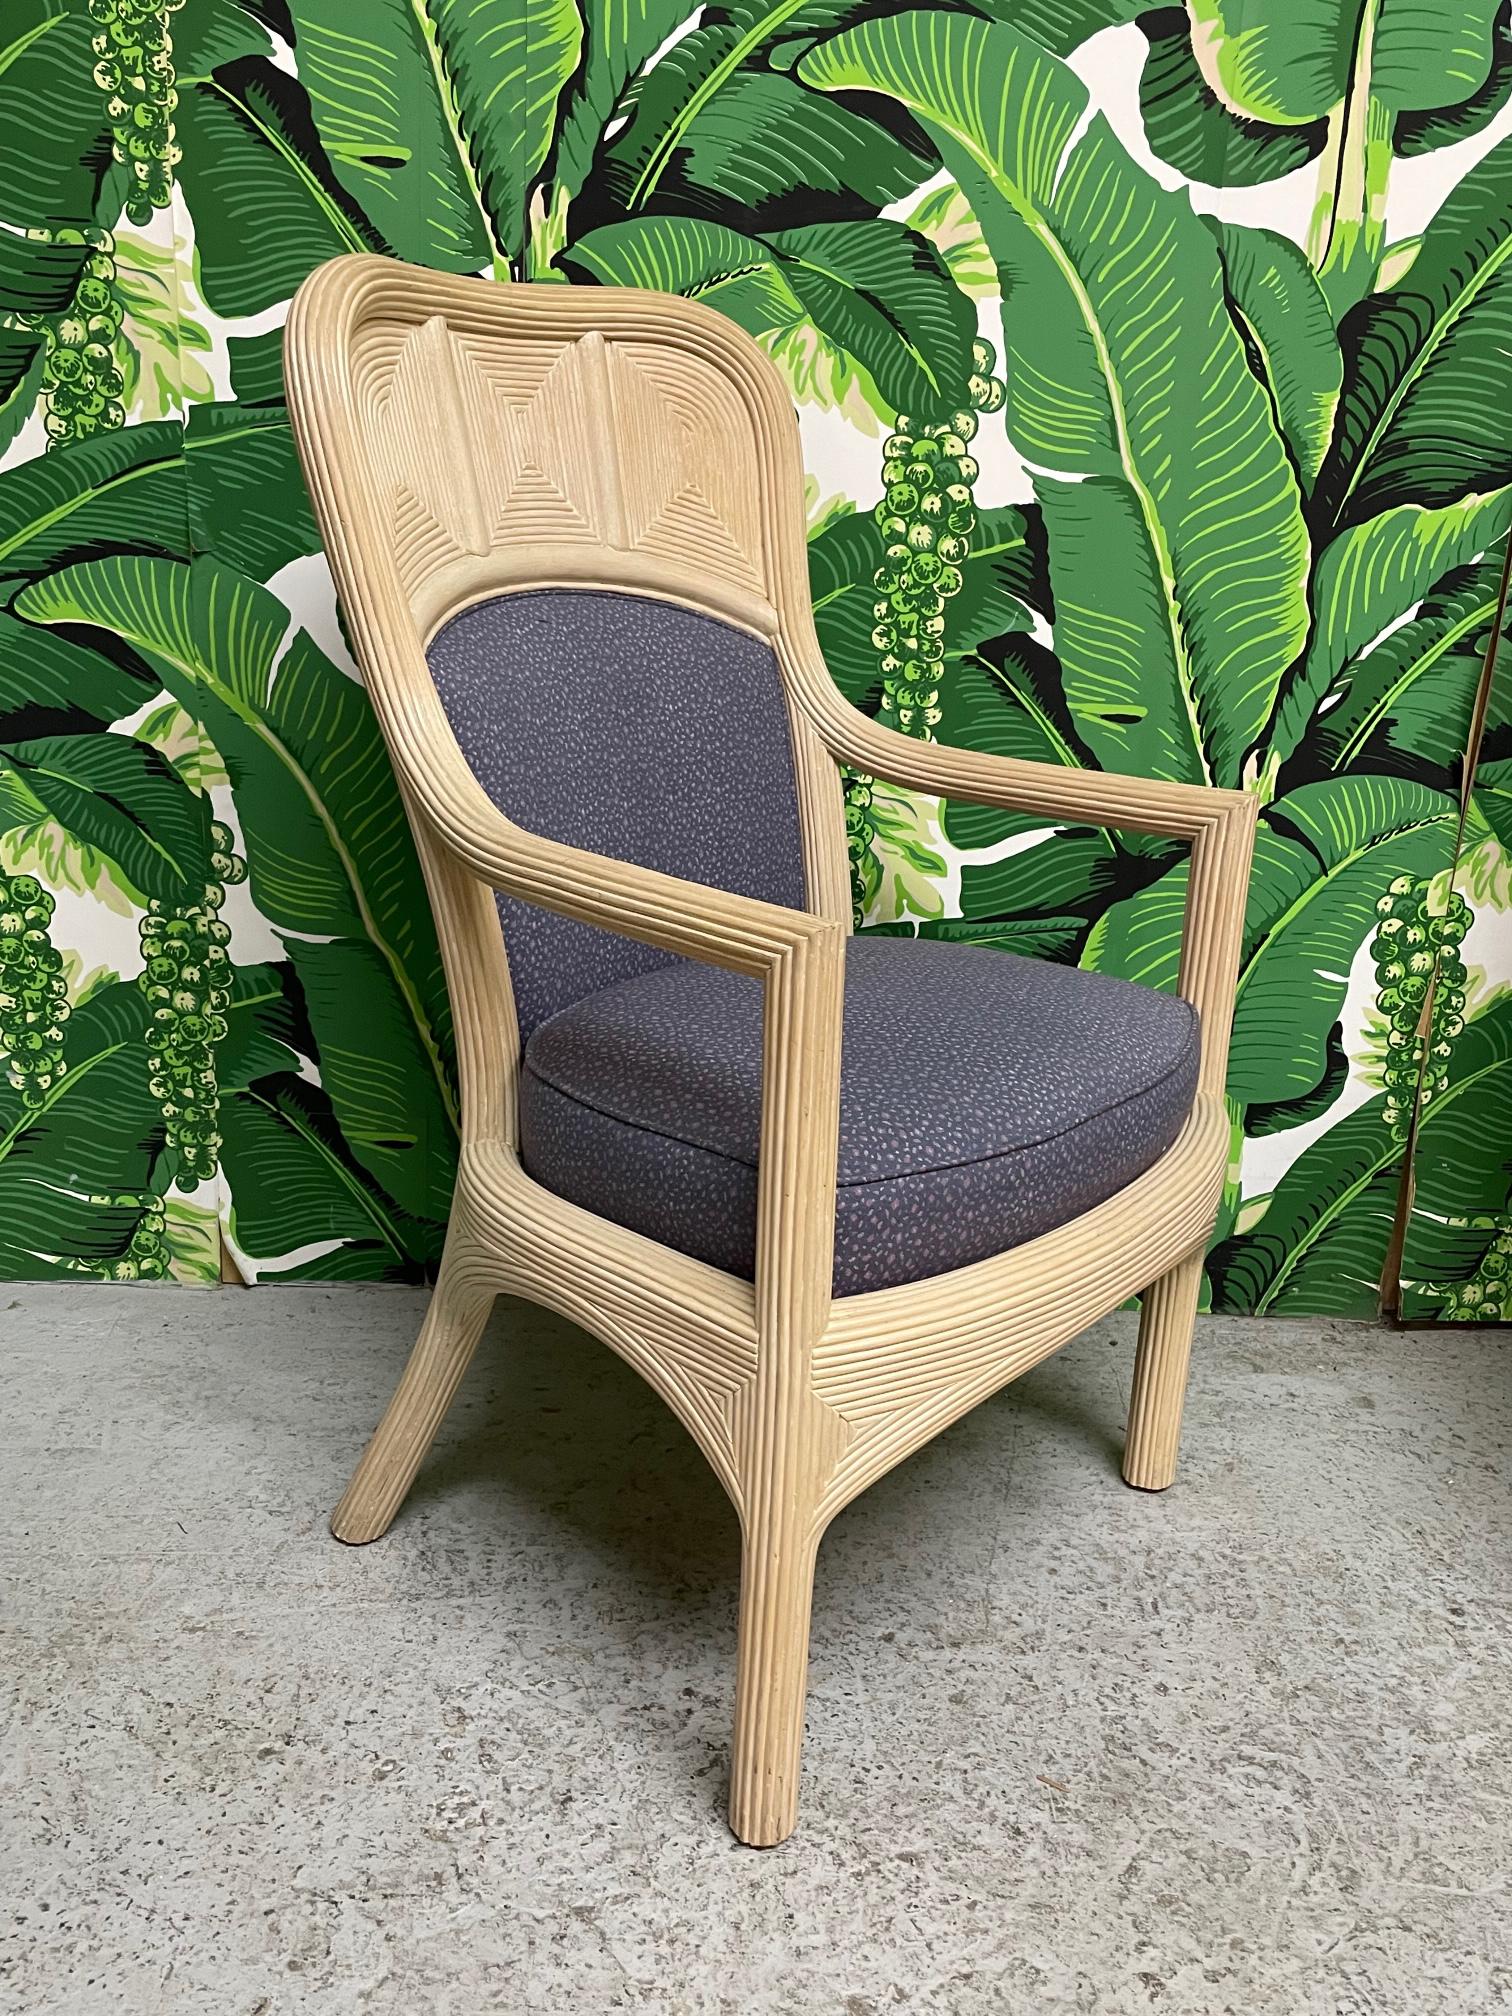 Set of six dining chairs feature full veneer of pencil reed rattan in a unique geometric design. Comfortable back and seat cushions. Upholstered in a purple floral pattern. Good condition with imperfections consistent with age, see photos for